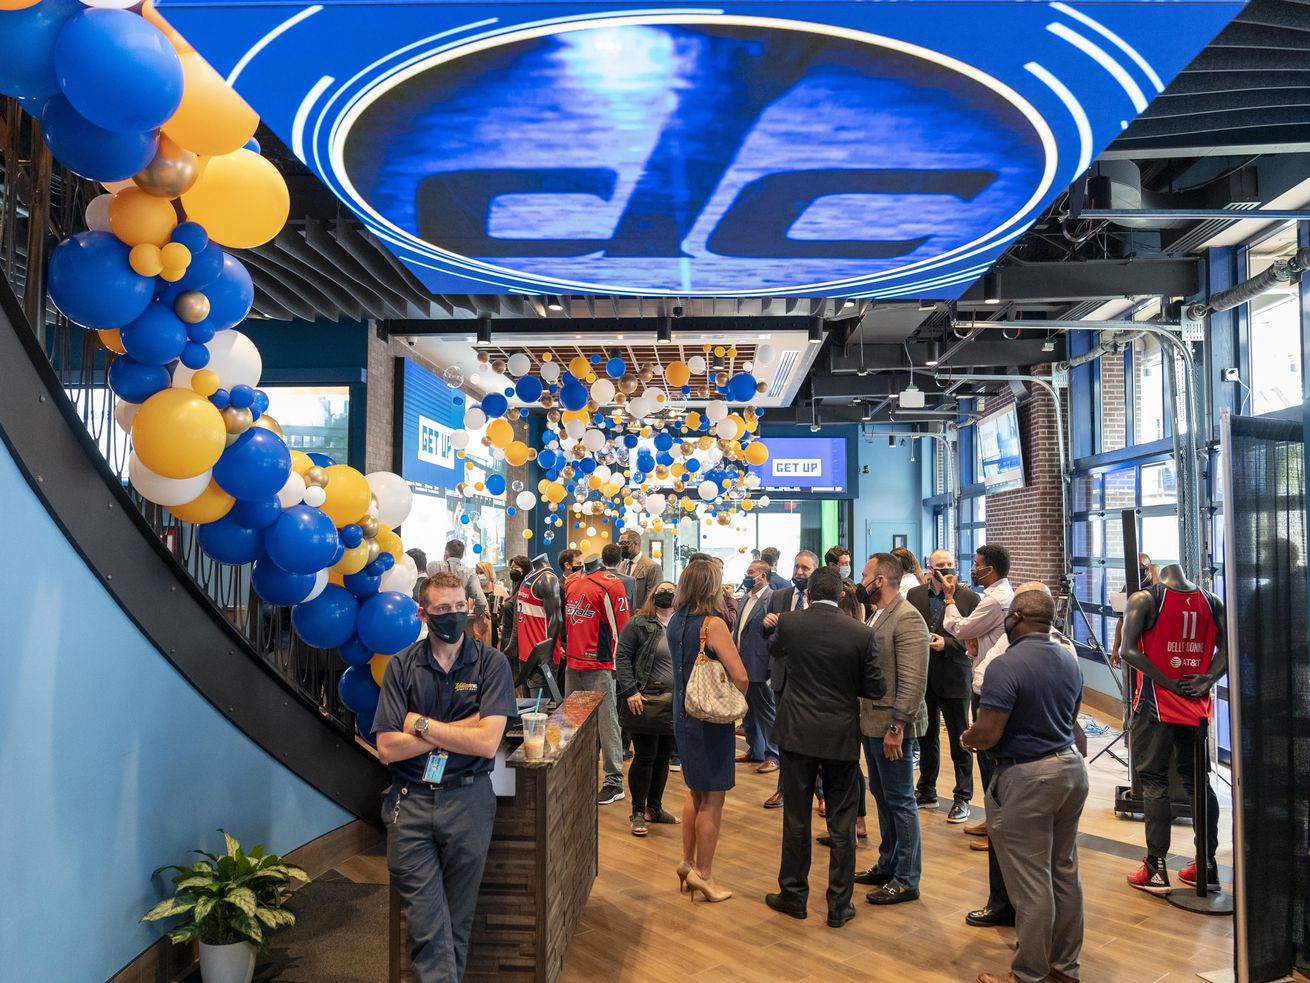 Guests mingle at a ribbon cutting ceremony at the William Hill Sportsbook at Capital One Arena in Washington, D.C. 